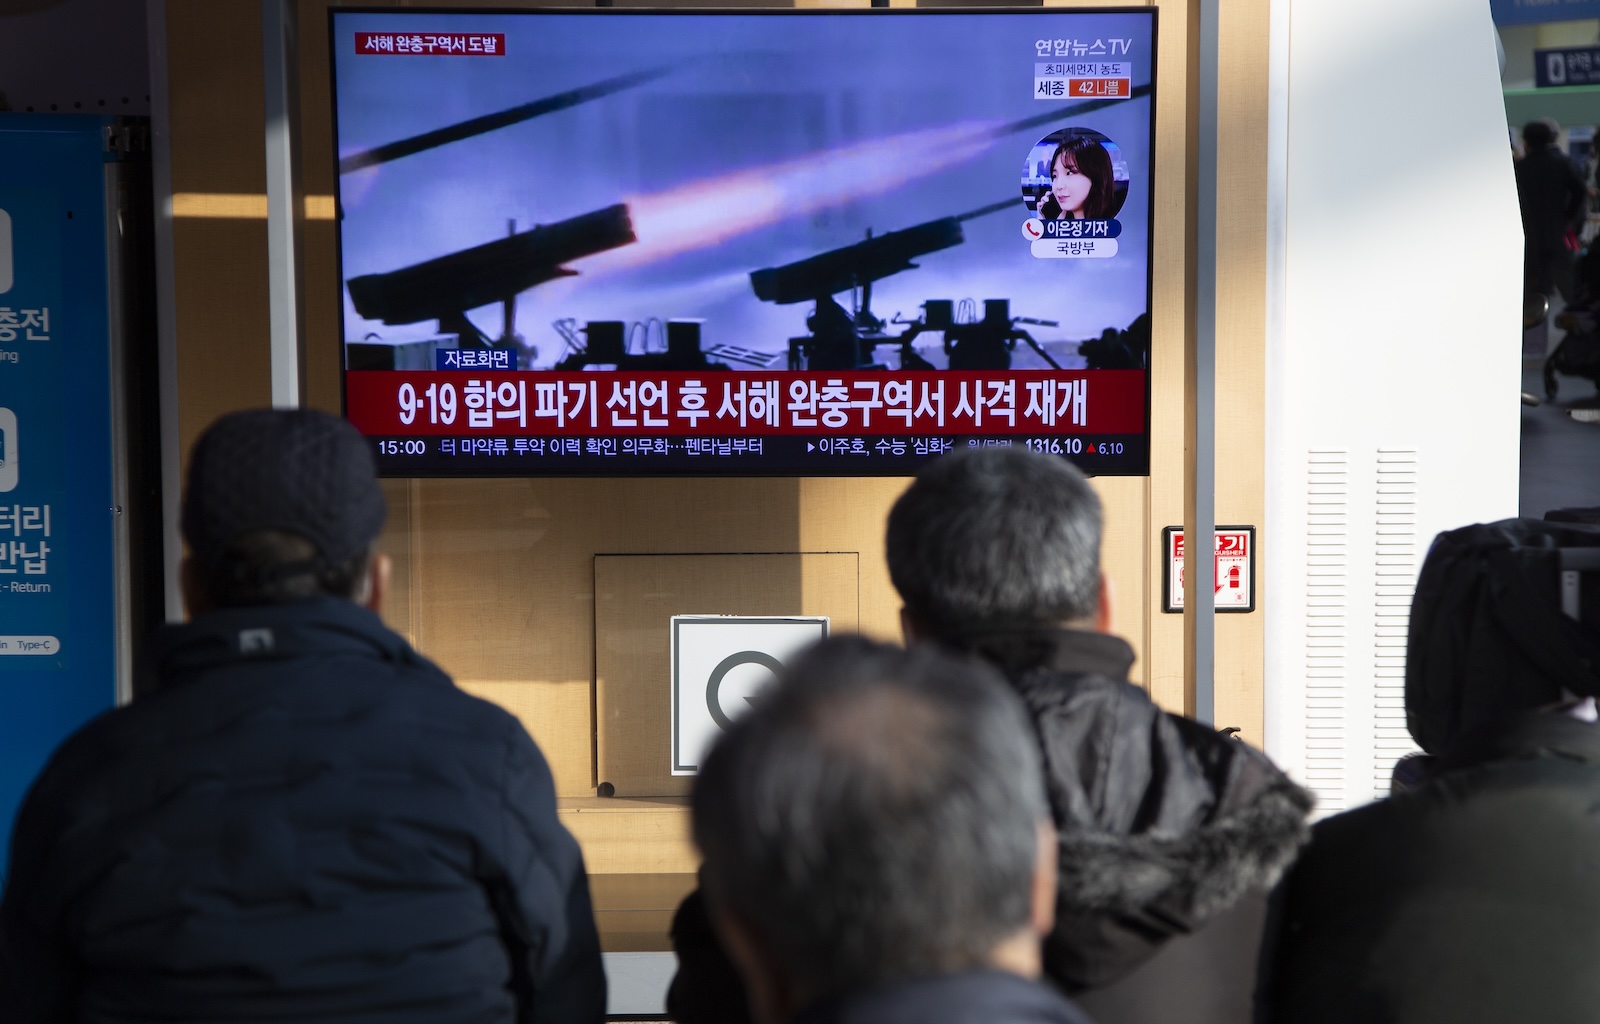 epa11058058 People watch the news on a TV at a station in Seoul, South Korea, 05 January 2024. According to South Korea's Joint Chiefs of Staff (JCS), North Korea fired some 200 artillery shells into waters off its western coast on 05 January morning, towards the South's Yeonpyeong island. Civilians on the islands of Yeonpyeong and Baengnyeong have been ordered to evacuate into shelters, South Korean officials said.  EPA/JEON HEON-KYUN